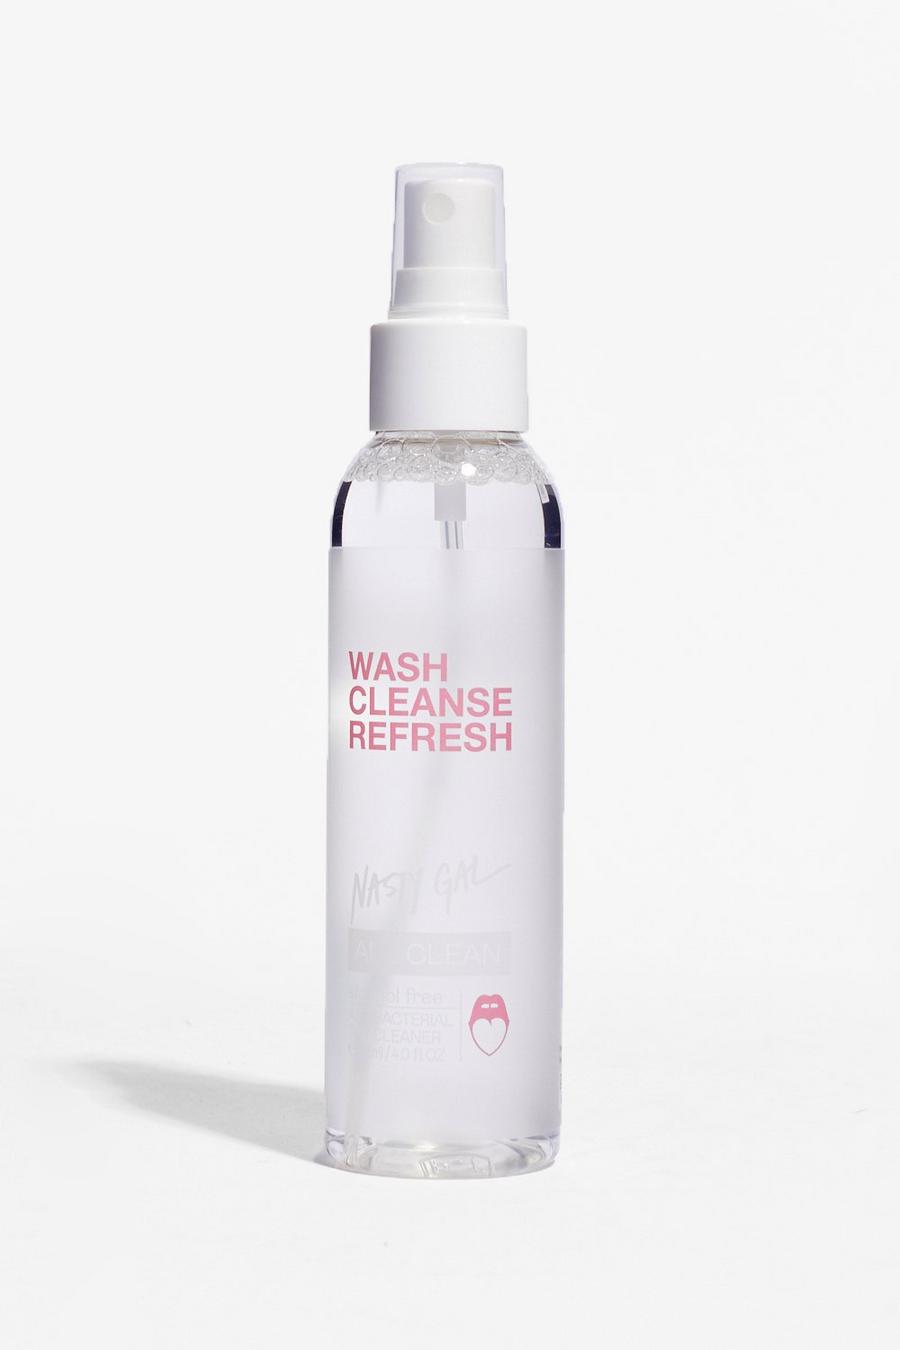 Wash Cleanse Refresh Sex Toy Cleaner